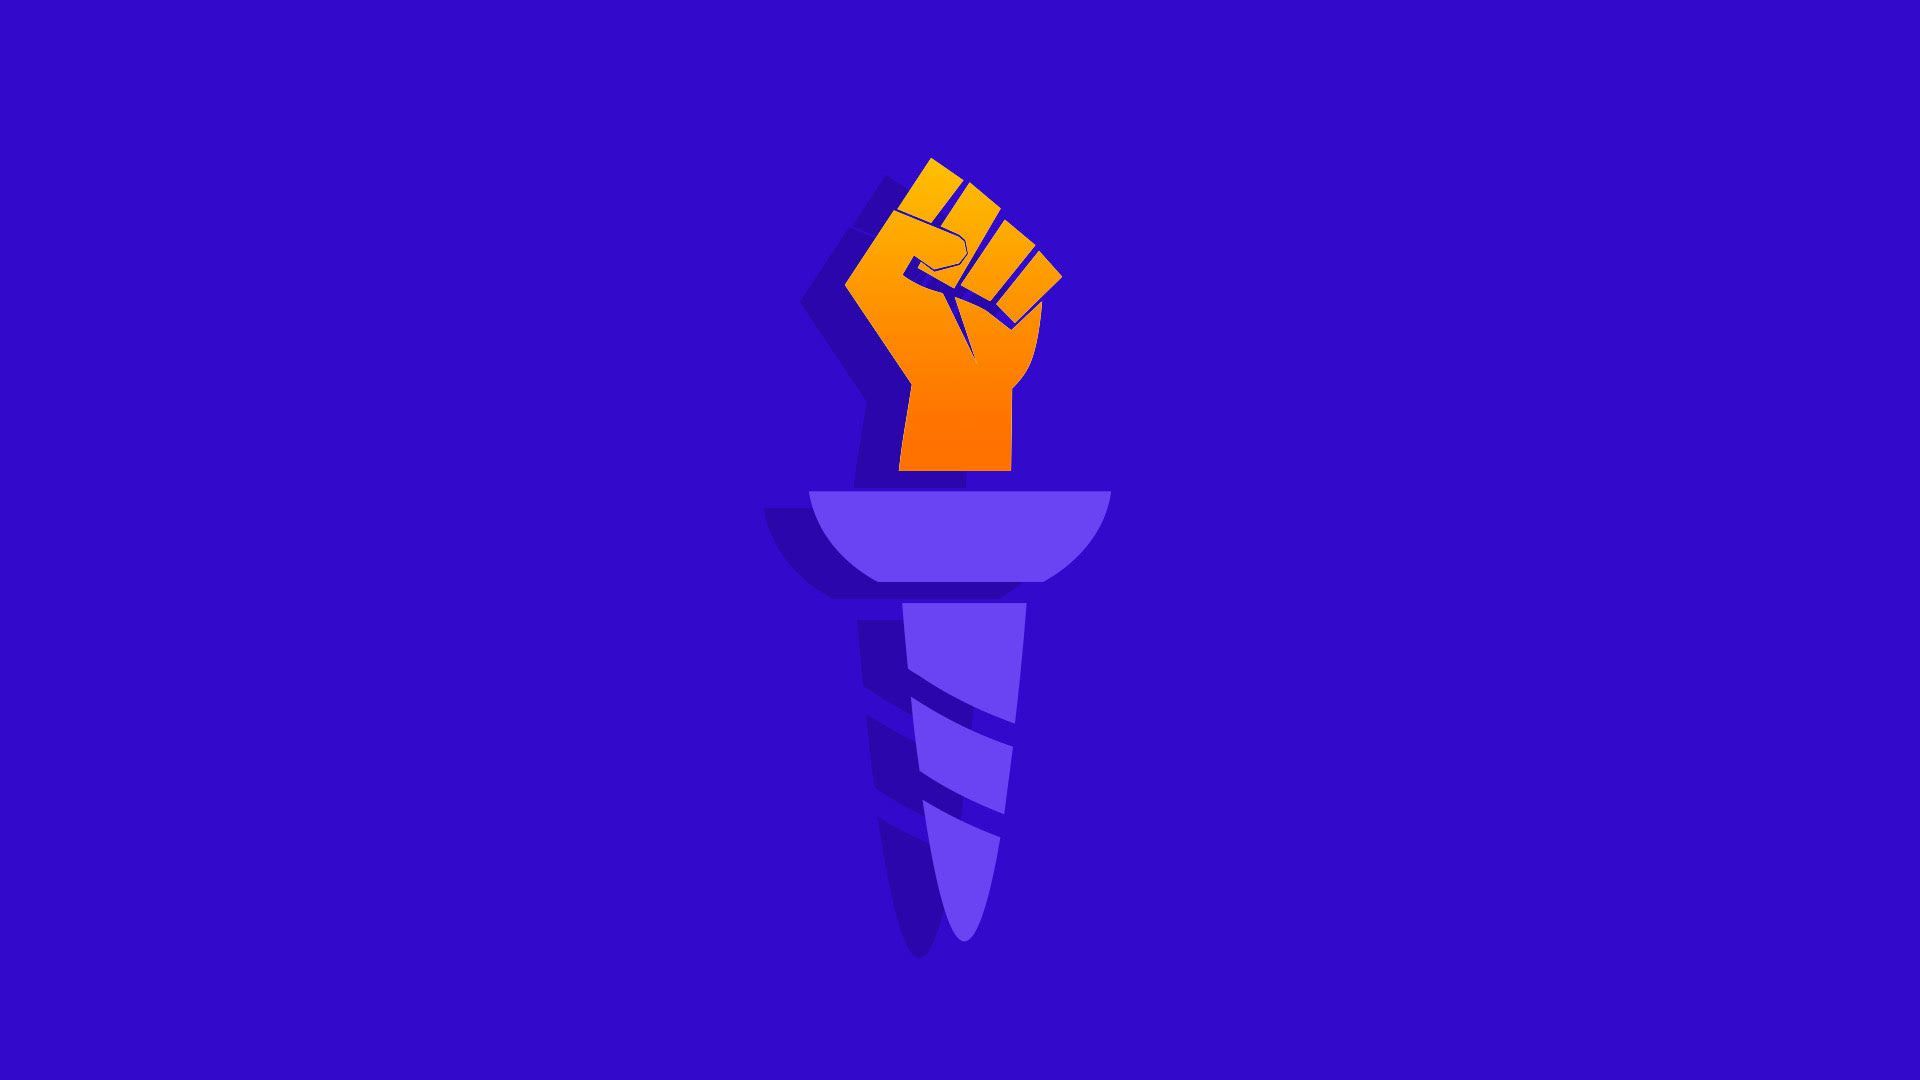 Illustration of the olympic torch with a union fist instead of a flame